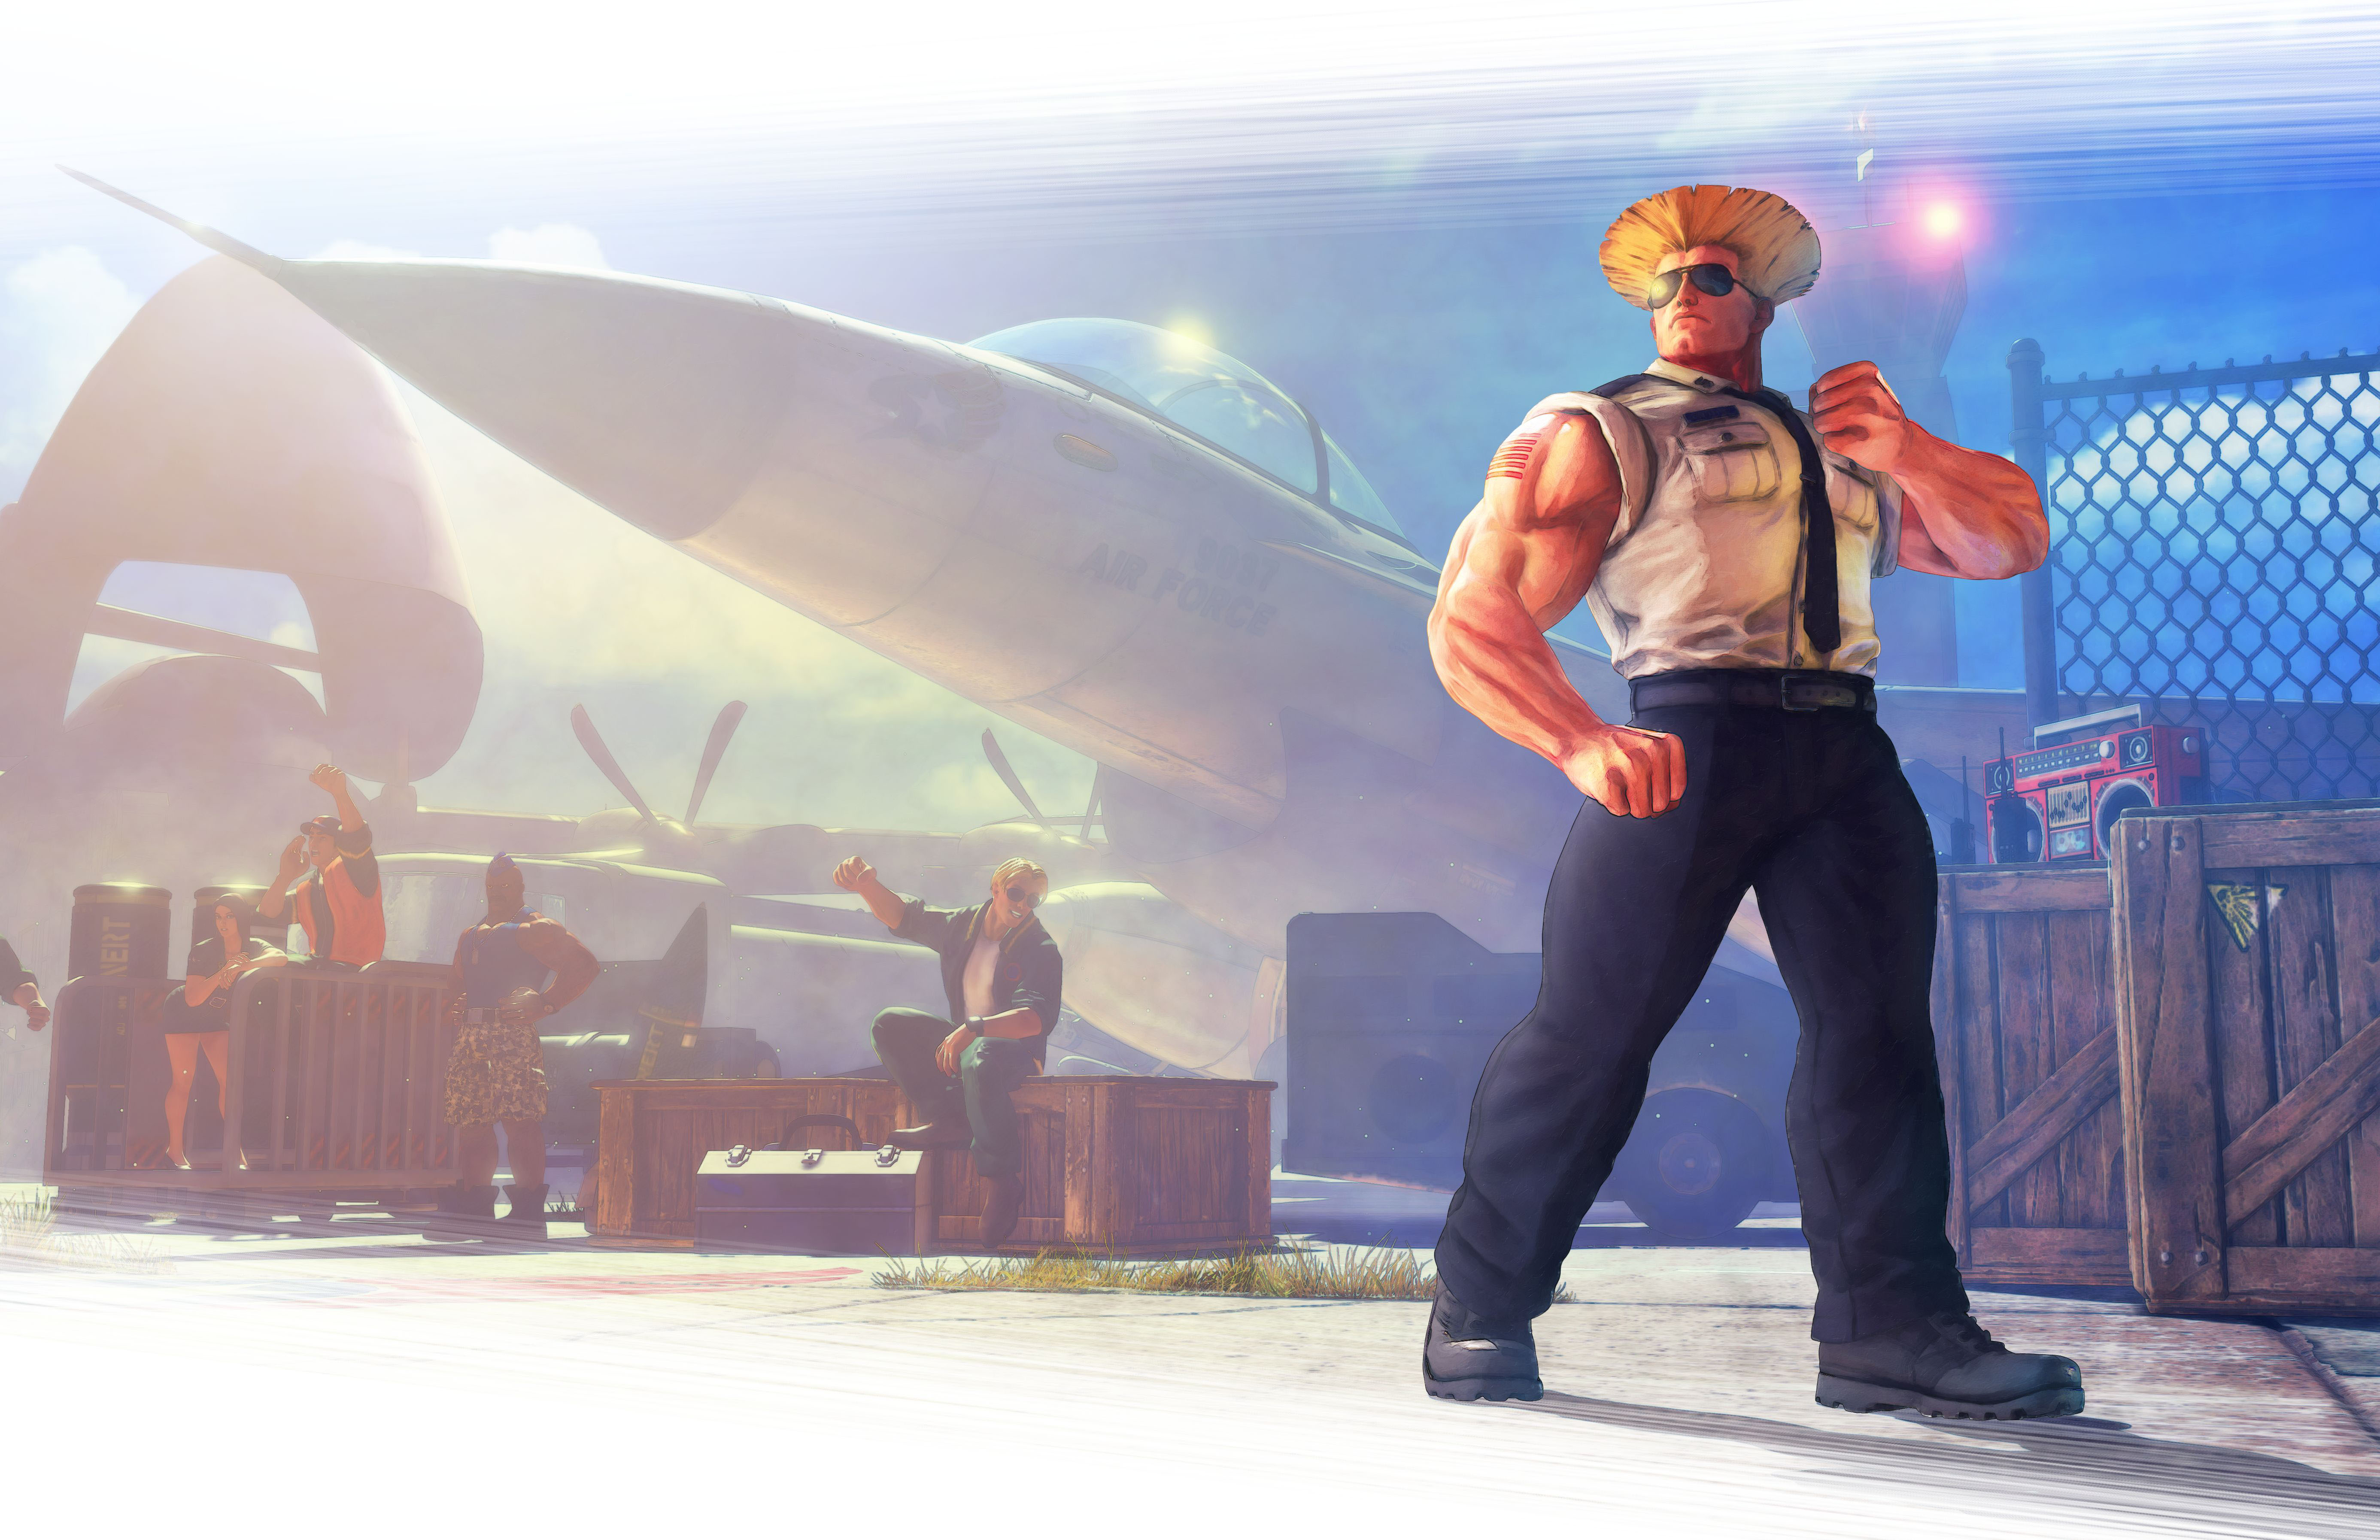 Guile - Characters & Art - Street Fighter Alpha 3